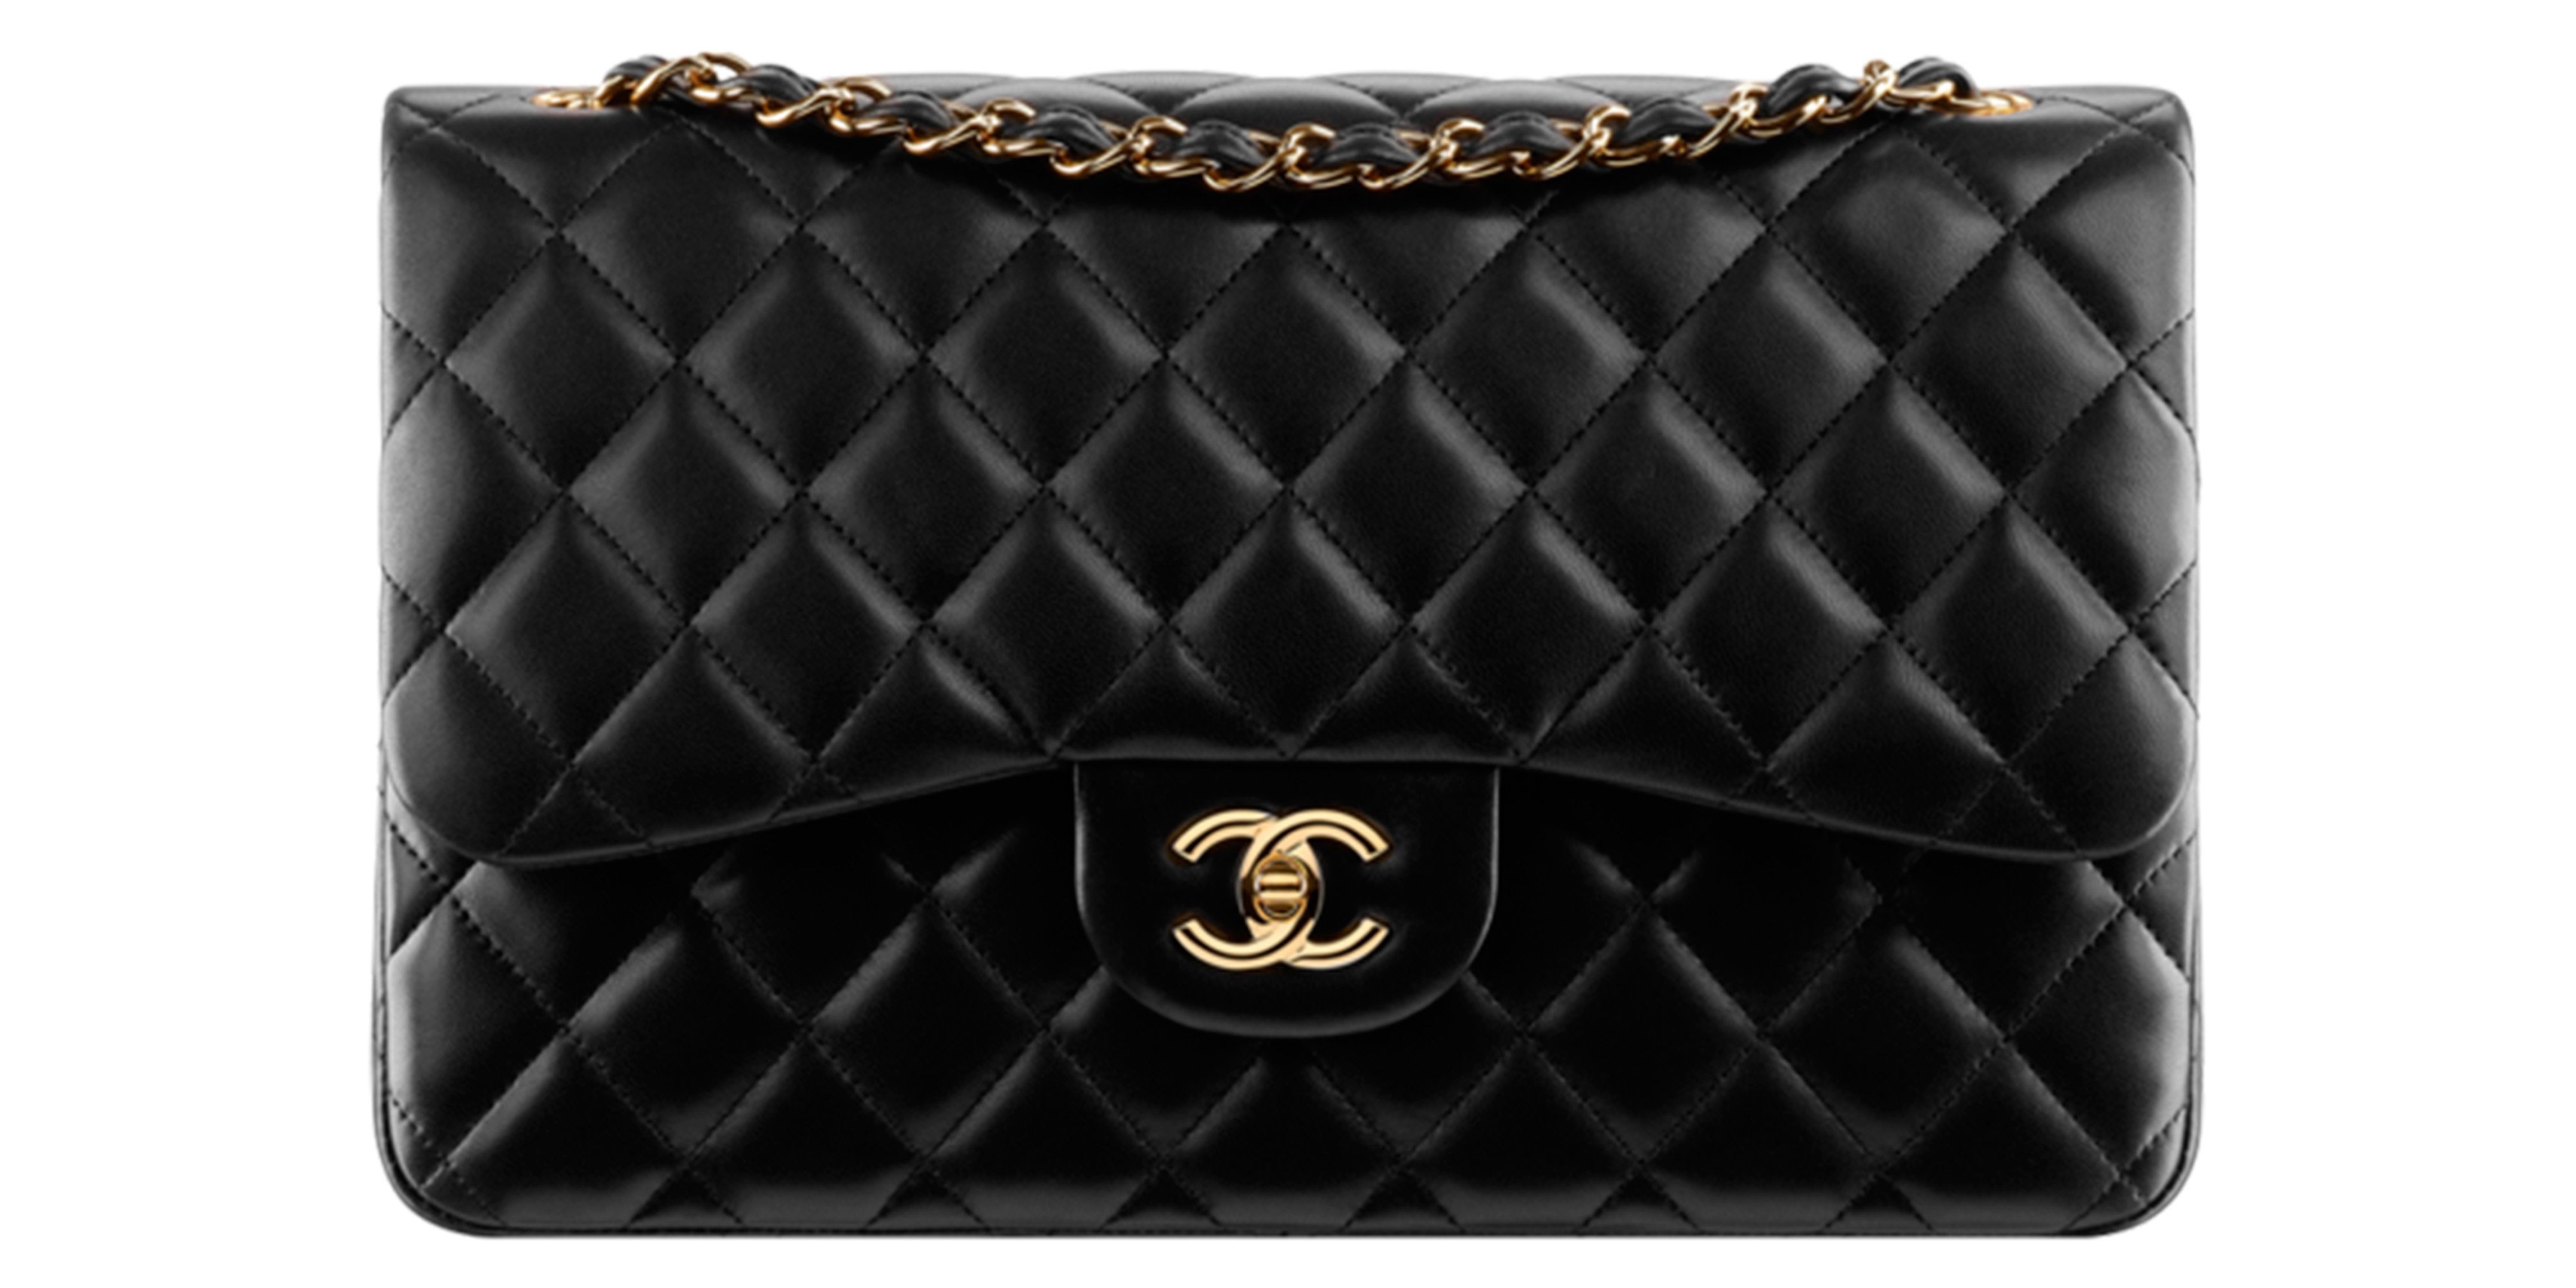 How Chanel has Increased the Price of Their Bags Over the Years | Love  Luxury